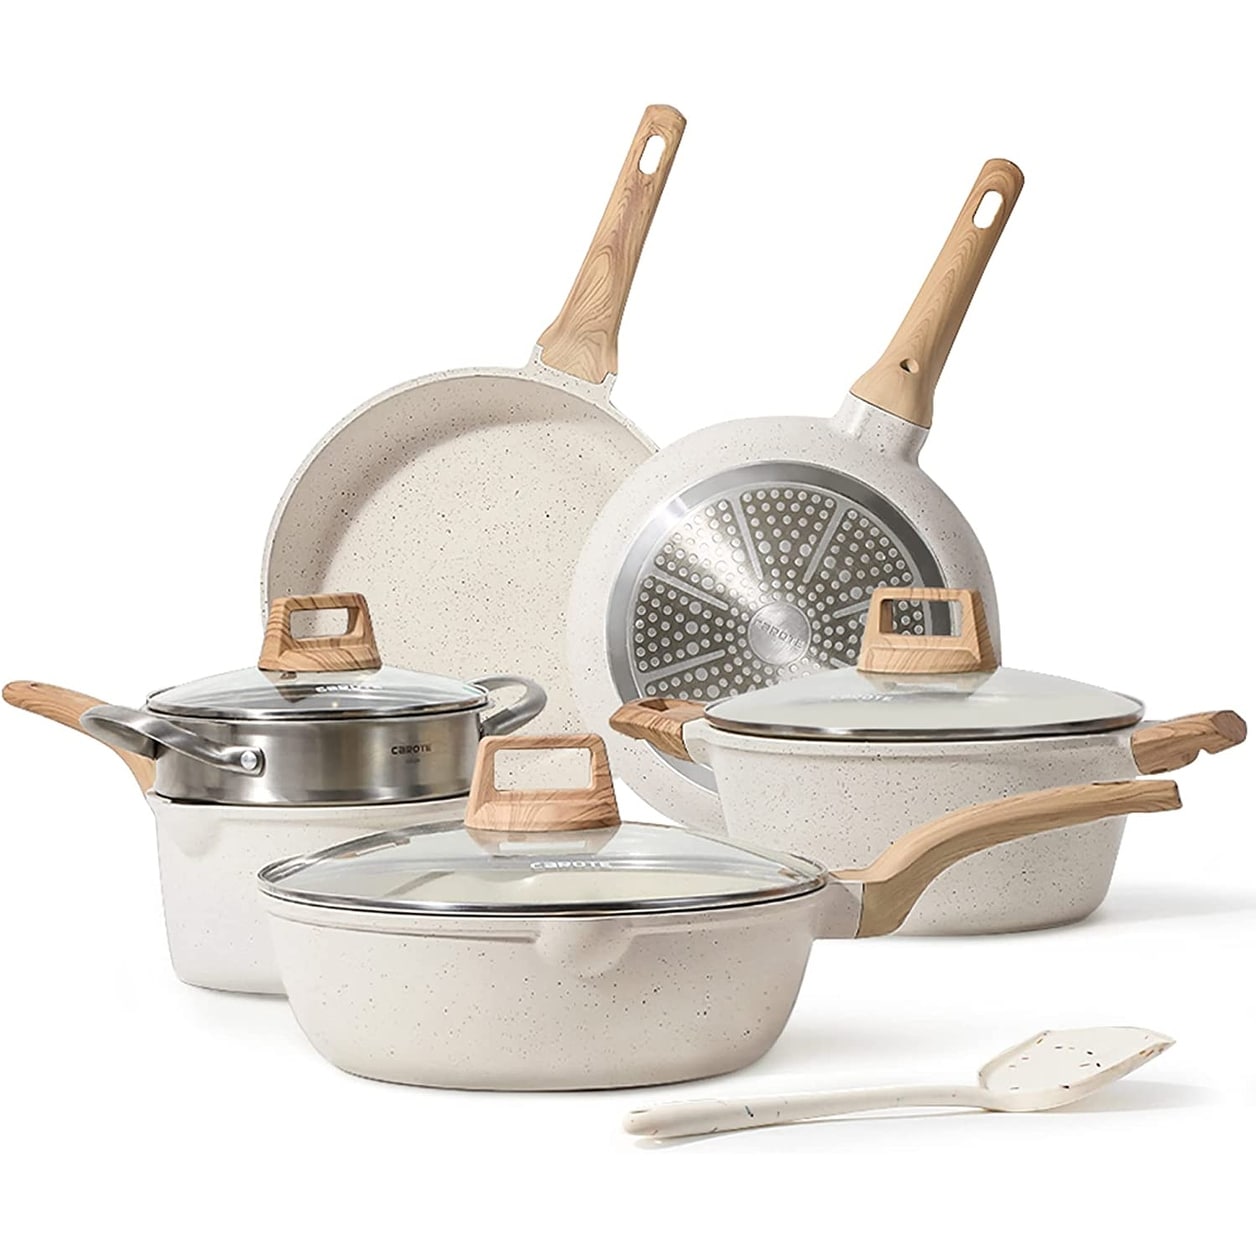 https://ak1.ostkcdn.com/images/products/is/images/direct/eec14ff4b06eb29d21263b3b216382f0d016bcc9/Pots-and-Pans-Set-Nonstick%2C-White-Granite-Induction-Kitchen-Cookware-Sets%2C-10-Pcs-Non-Stick-Cooking-Set.jpg